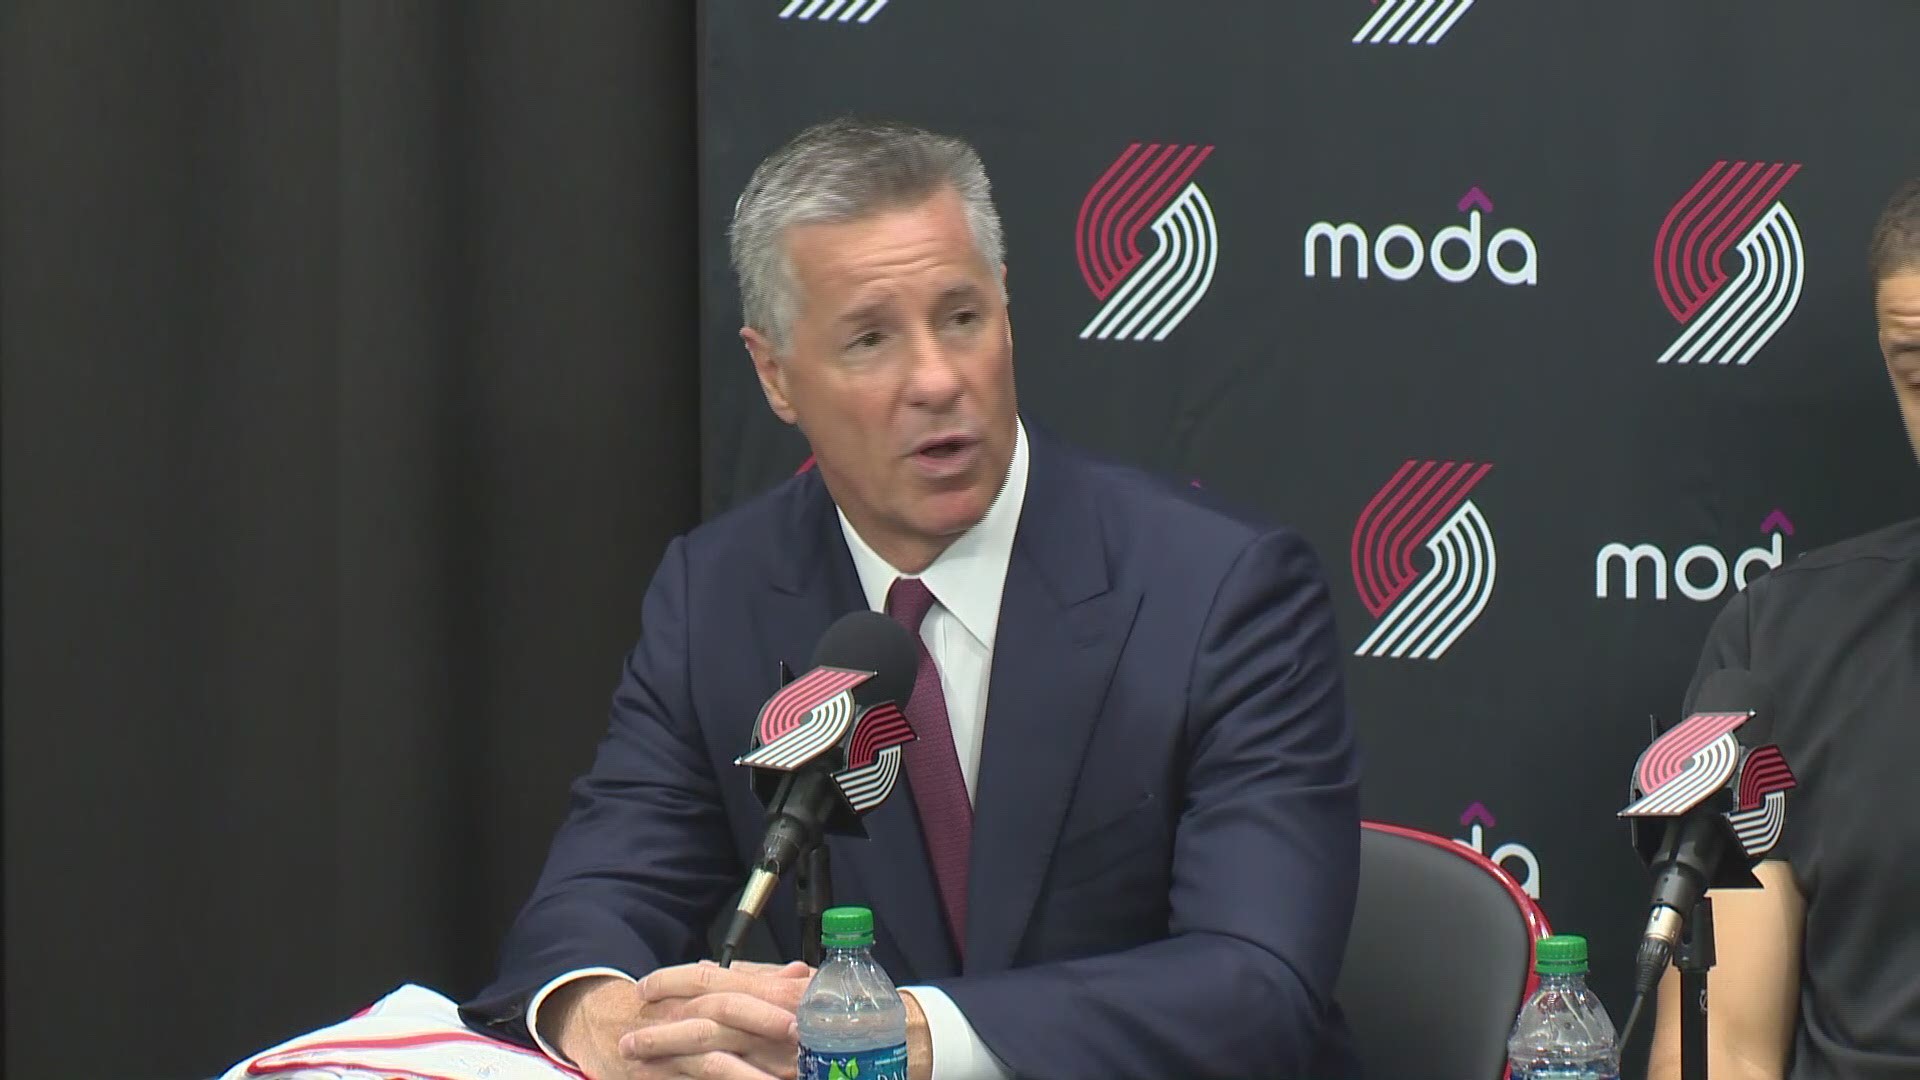 The Blazers GM said shooting and floor spacing were priorities this offseason, and Davis wasn't part of that plan.